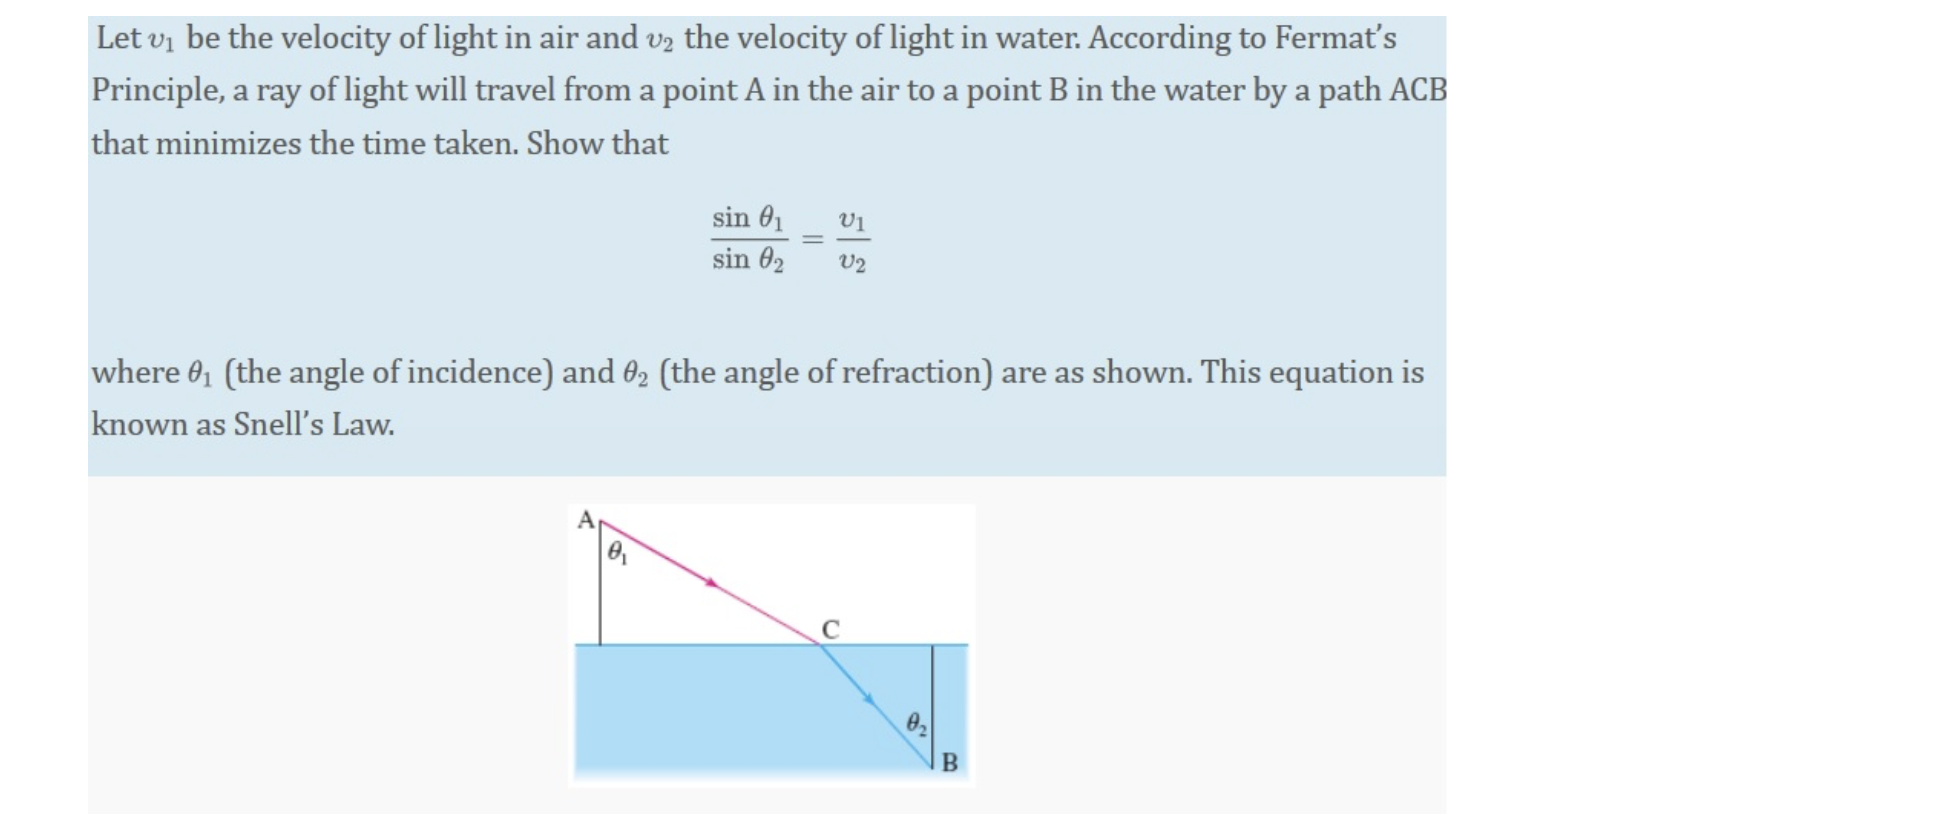 Let vi be the velocity of light in air and vz the velocity of light in water. According to Fermať's
Principle, a ray of light will travel from a point A in the air to a point B in the water by a path ACI
that minimizes the time taken. Show that
sin 61
sin 02
V2
where 0, (the angle of incidence) and 02 (the angle of refraction) are as shown. This equation is
known as Snell's Law.
